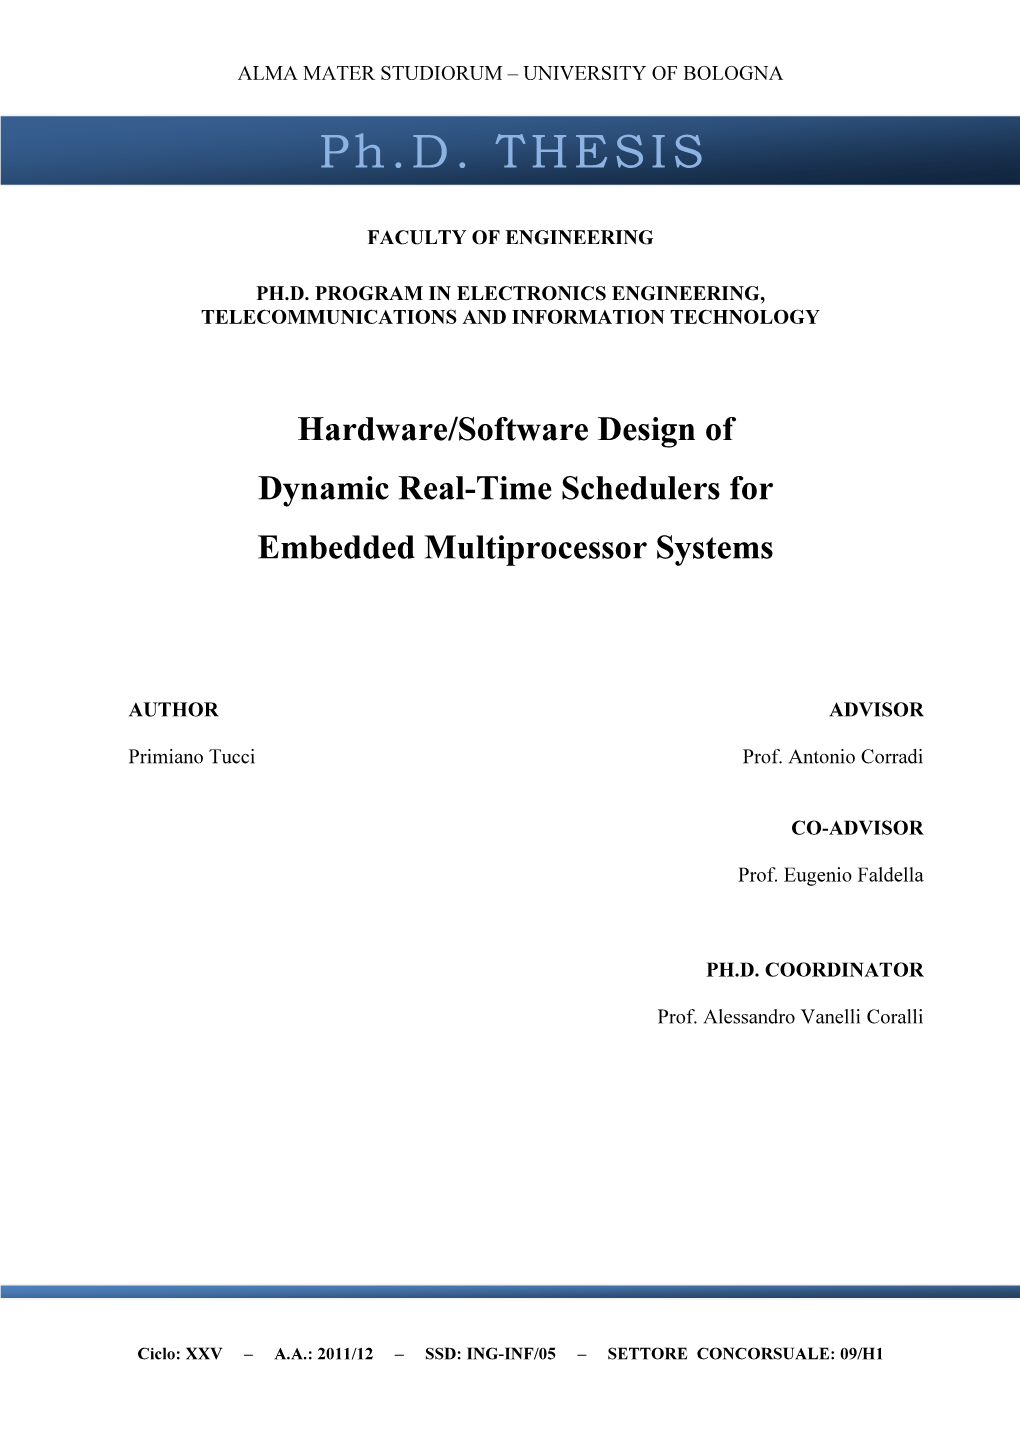 Hardware/Software Design of Dynamic Real-Time Schedulers for Embedded Multiprocessor Systems